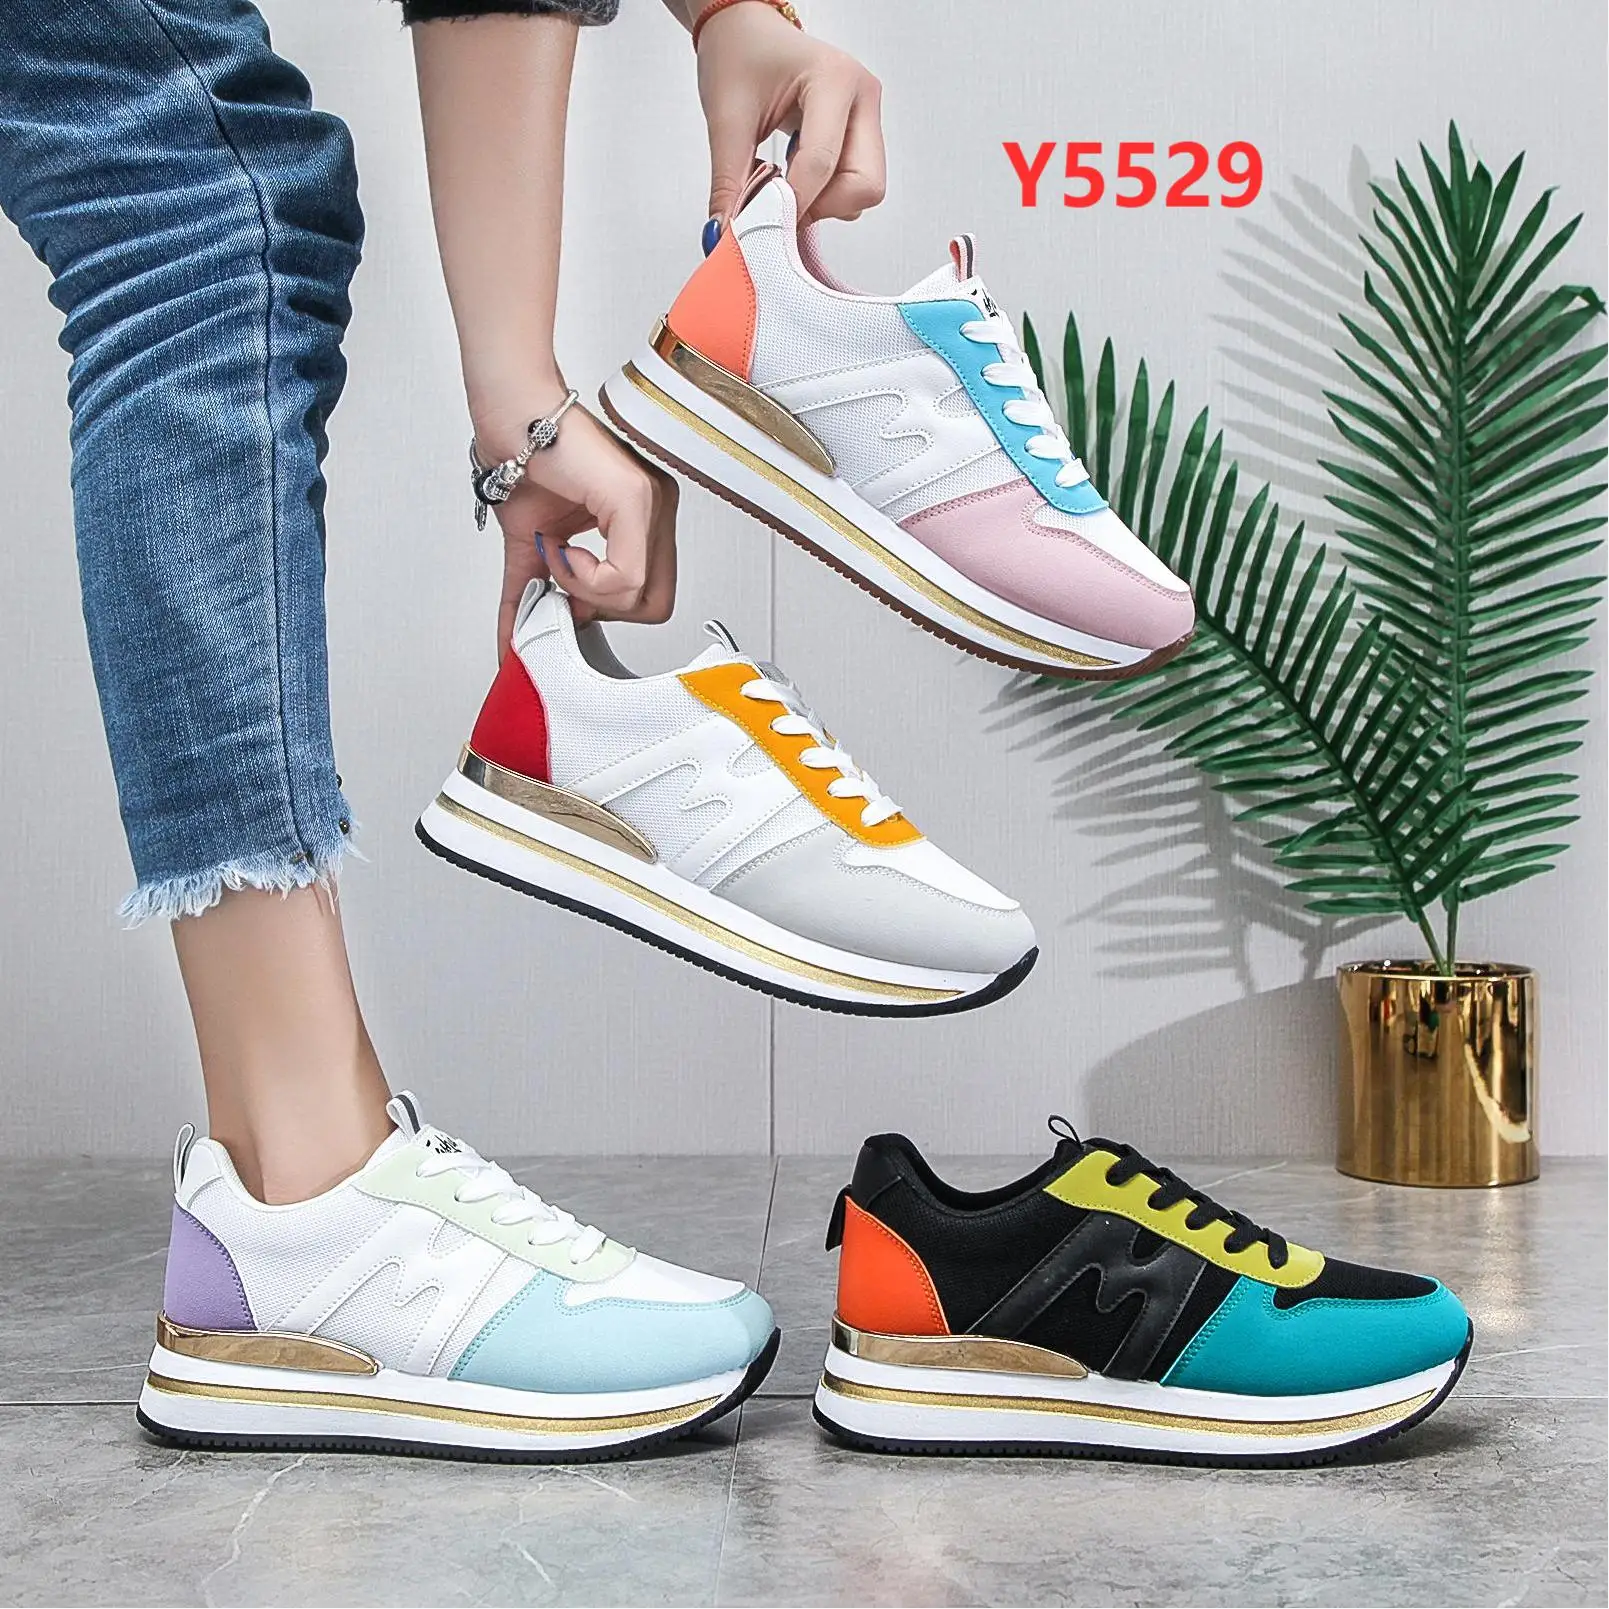 2022 walking shoes Sport Shoes Running Sneakers New Arrivals Girls Lace Up Suede Fashion Casual shoes